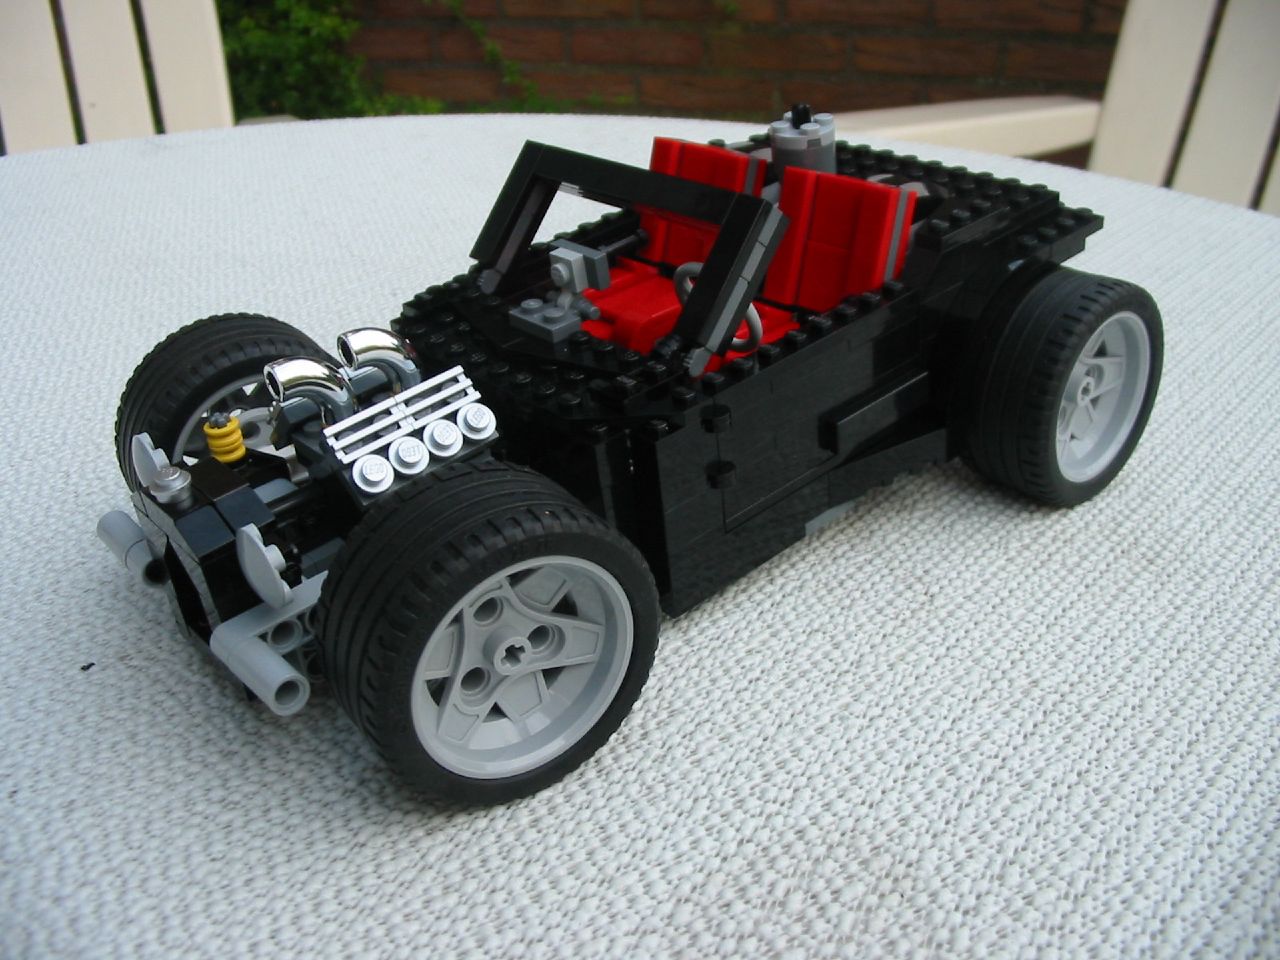 the vehicle is made out of legos and sits on the white surface